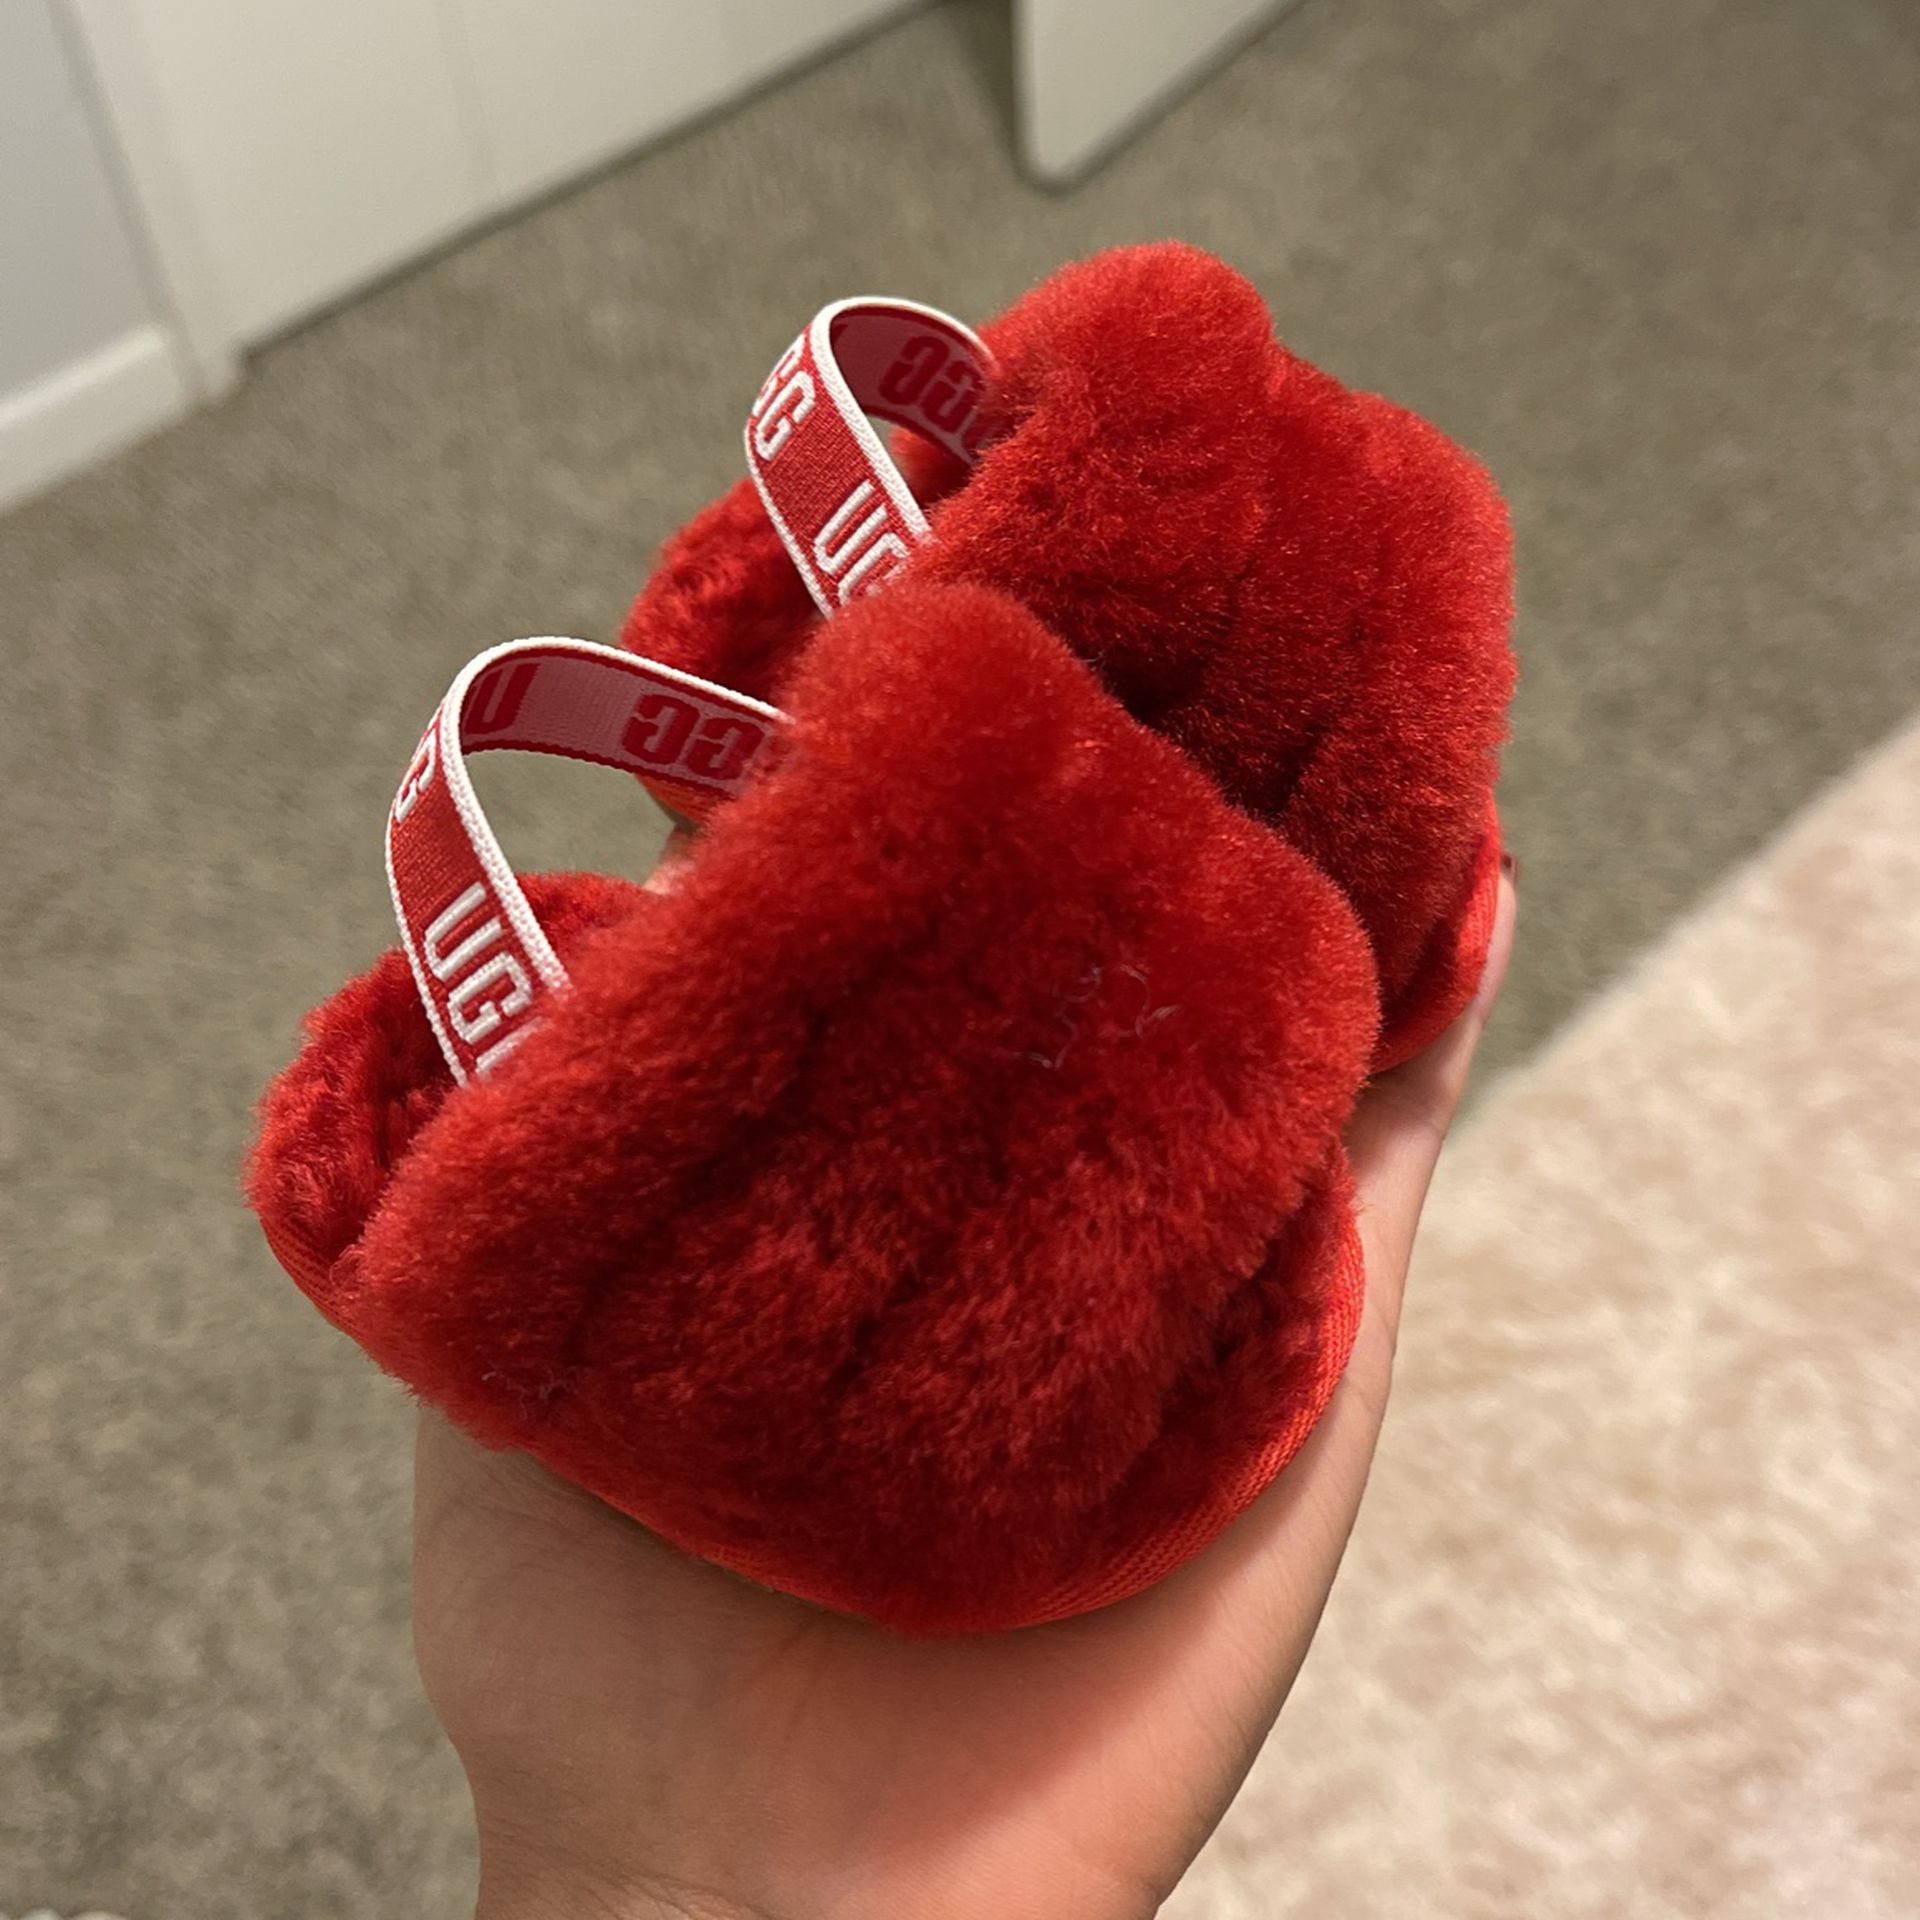 Baby UGG slippers